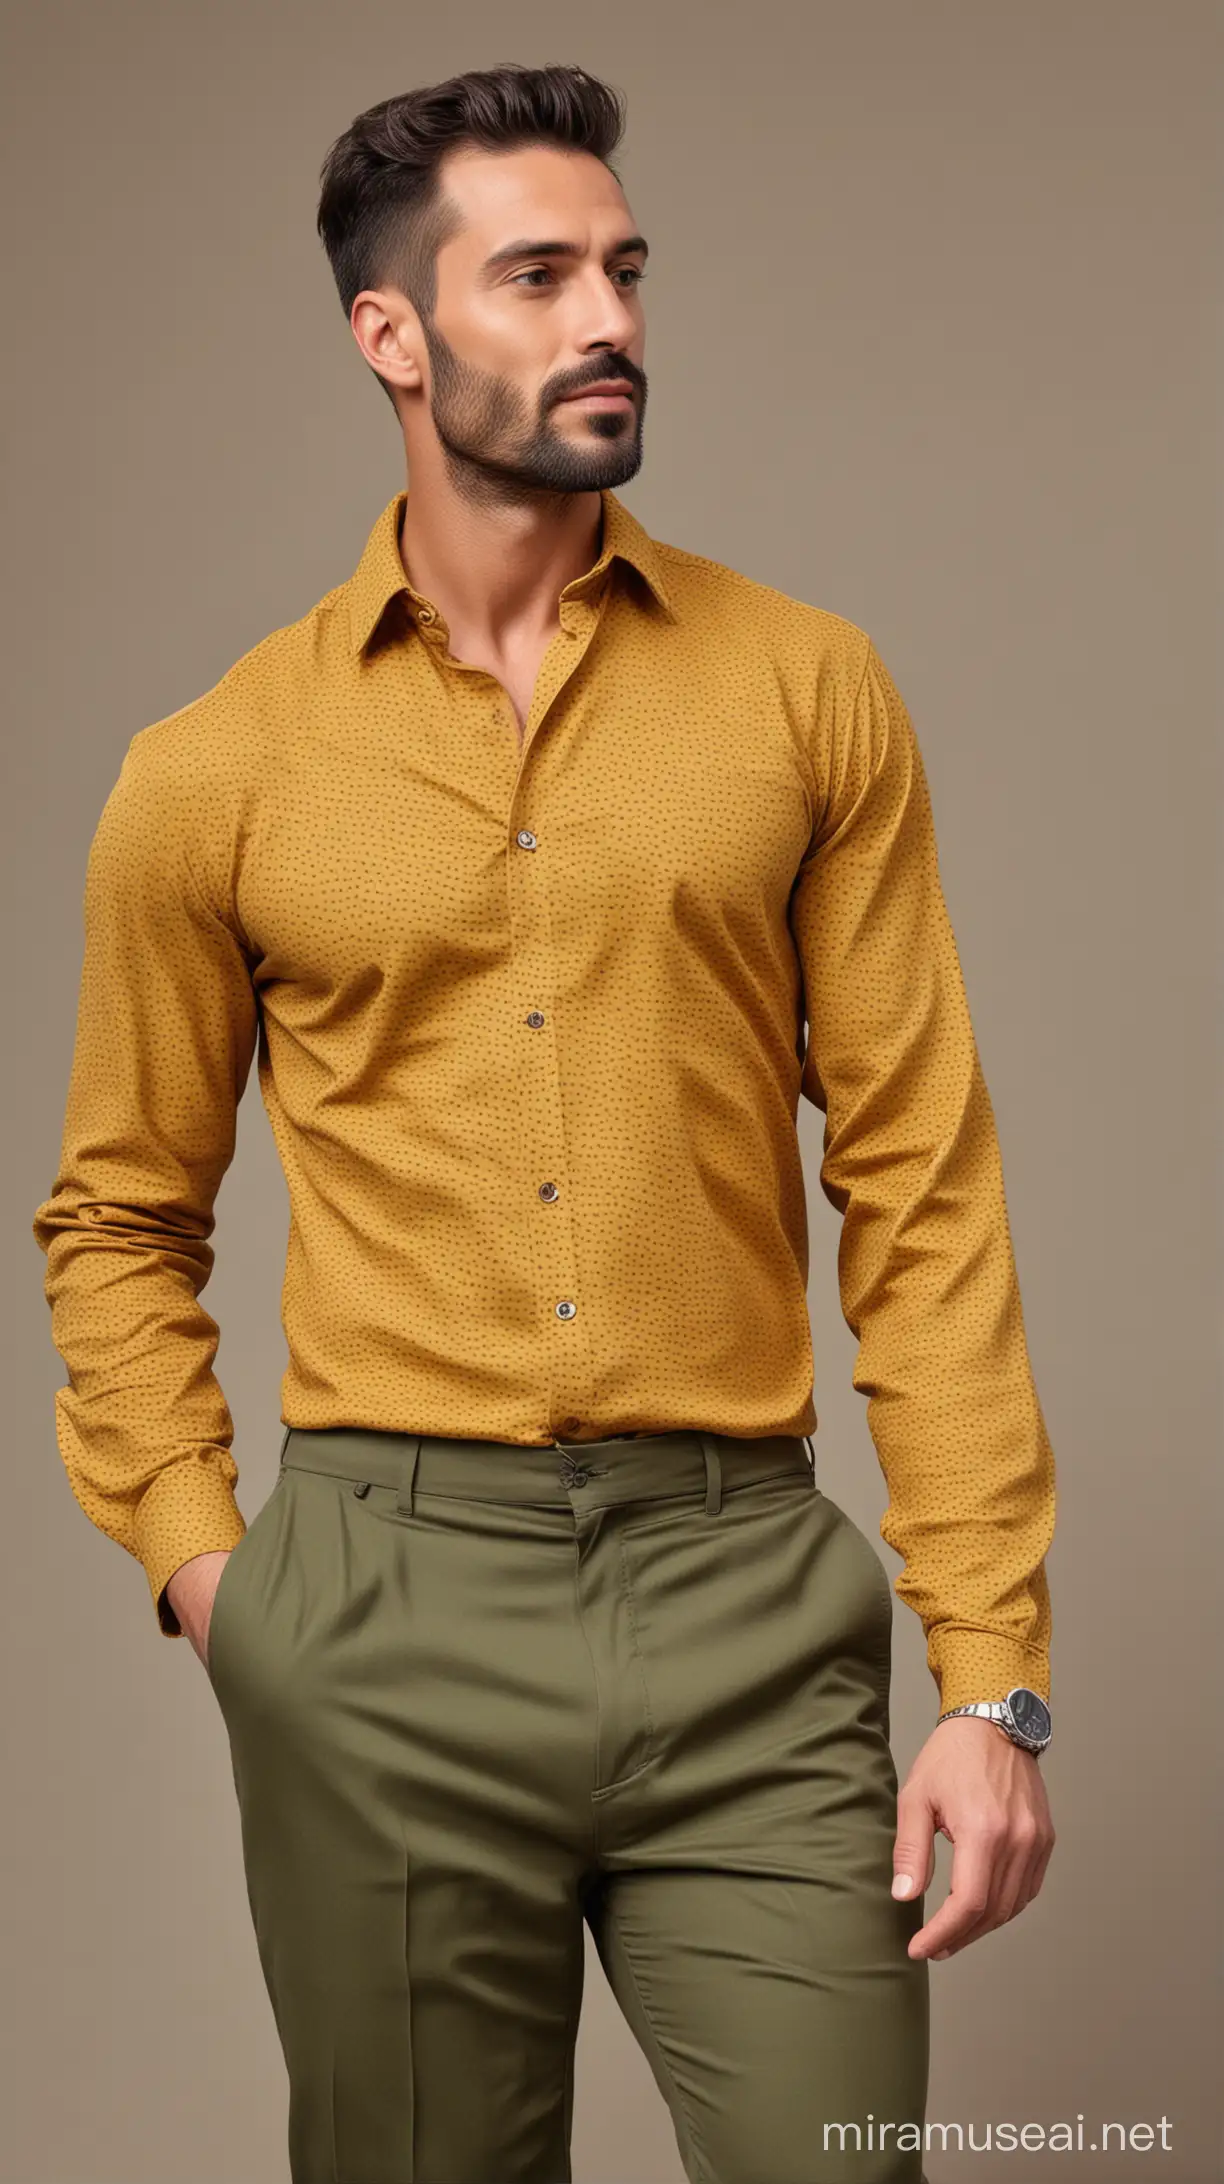 40 year fit men wearing brick printed honey coloured shirt with olive green trousers